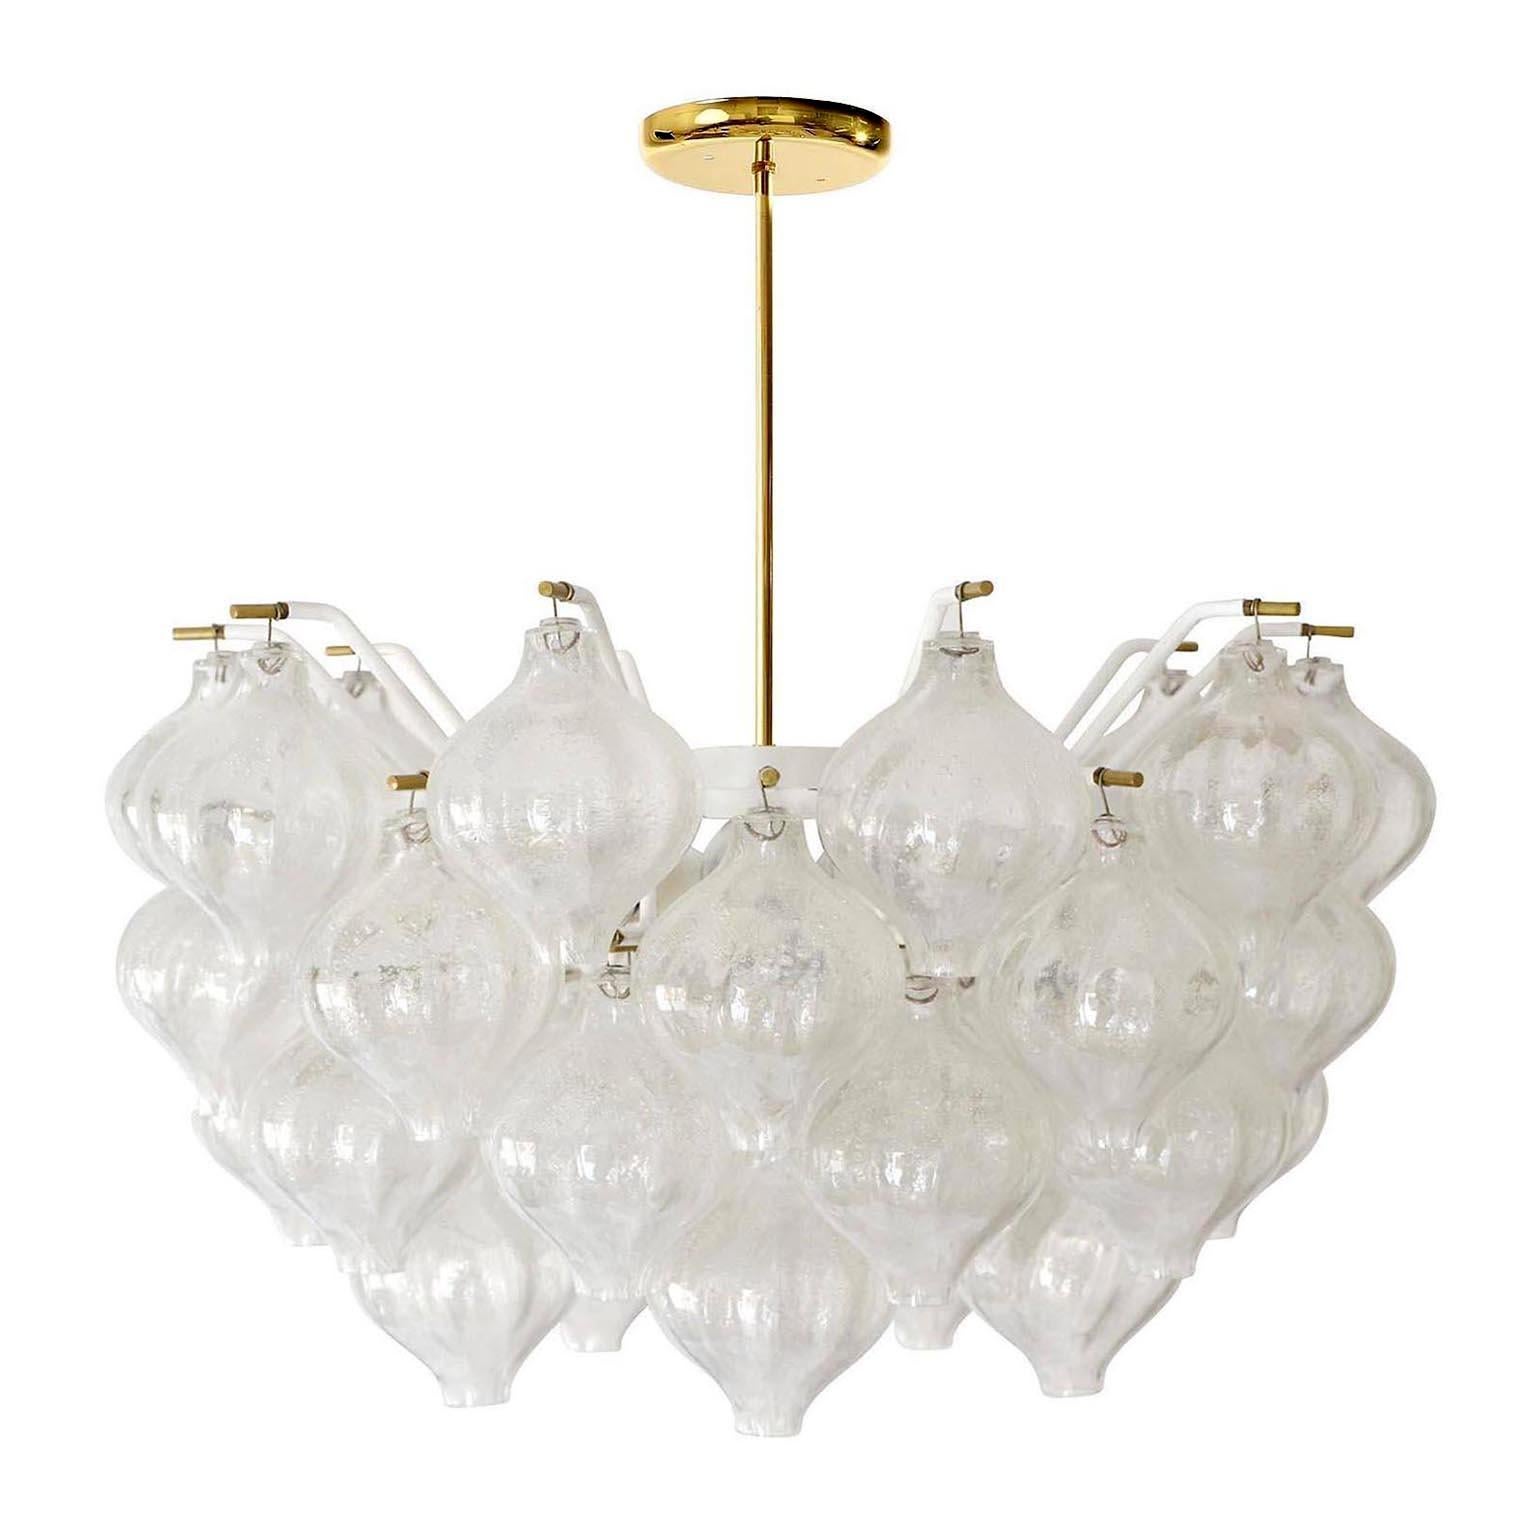 A fantastic light fixture model Tulipan by J.T. Kalmar, Vienna, Austria, manufactured in midcentury, circa 1970 (late 1960s or early 1970s).
The name Tulipan derives from the tulip shaped hand blown bubble glasses. Each glass is handmade and